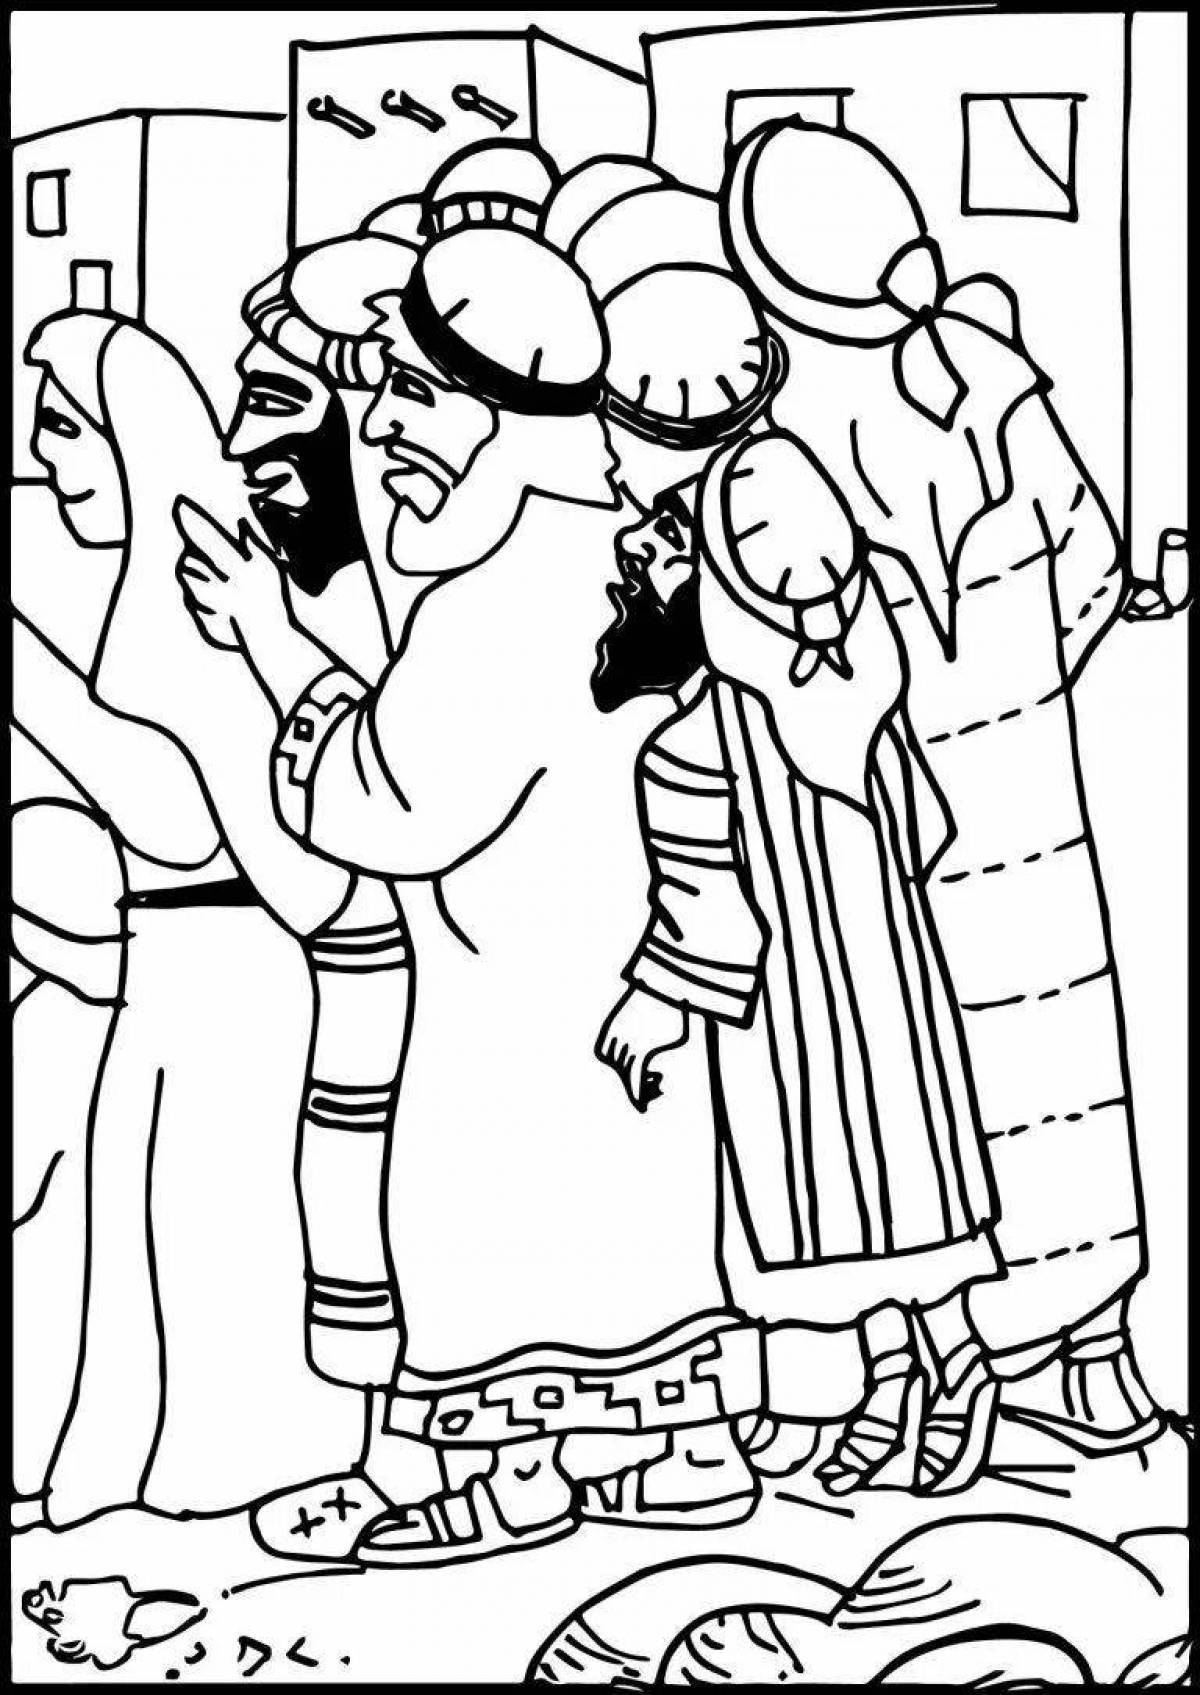 Coloring page joyful publican and Pharisee